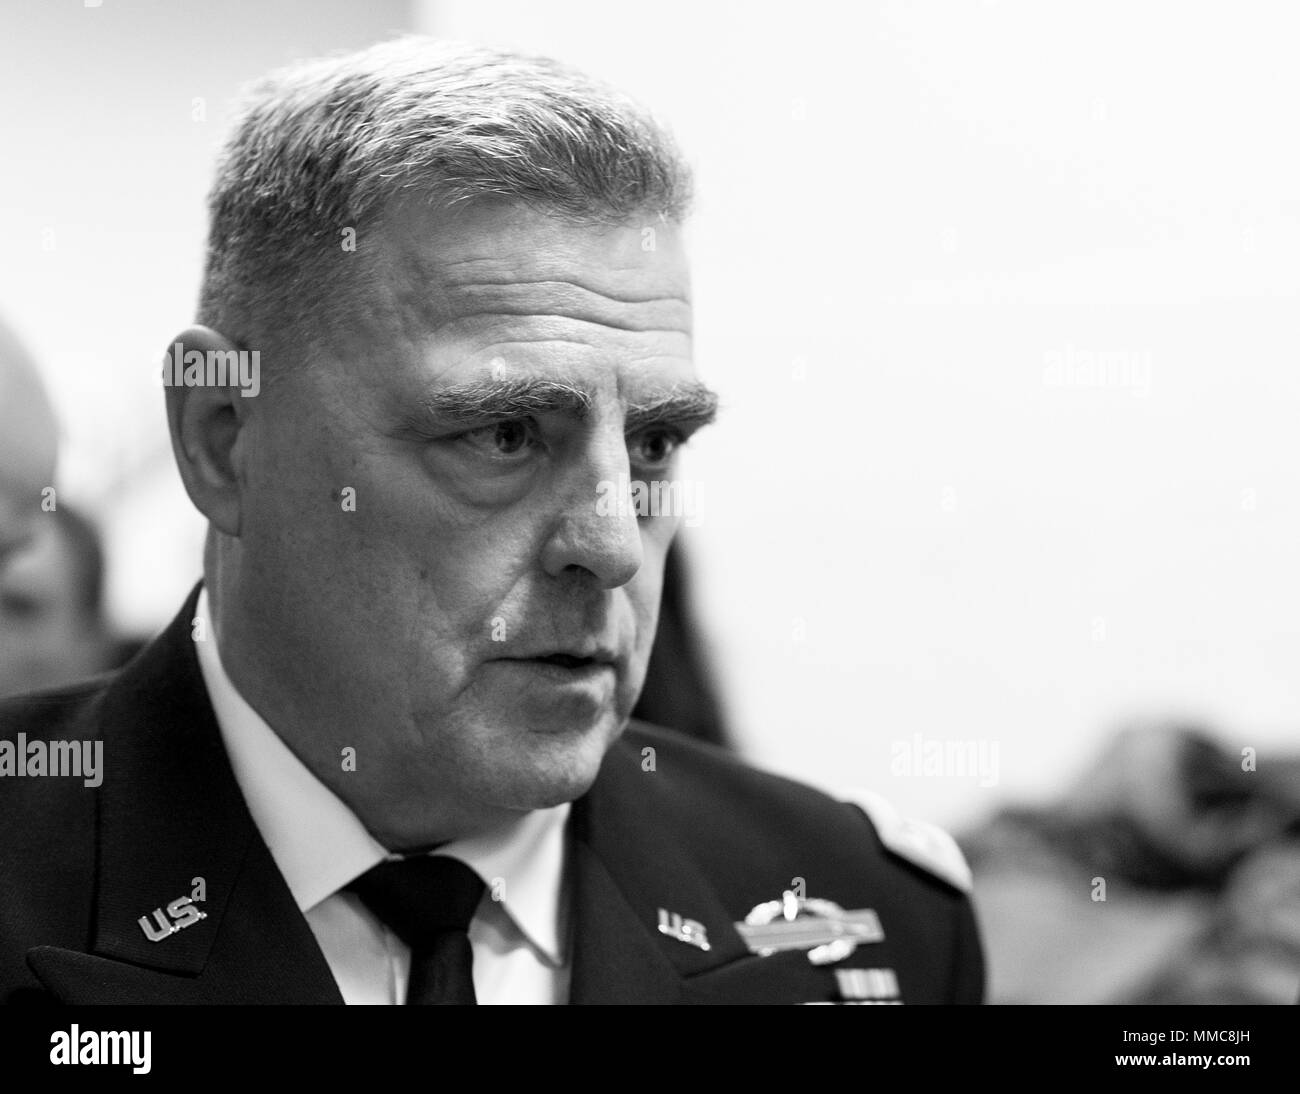 U.S. Army Chief of Staff Gen. Mark A. Milley backstage at AUSA, Oct. 10, 2017.    U.S. Army photo illustration by Daniel Torok (This image was cropped to emphasize subject and converted to black-and-white.) Stock Photo